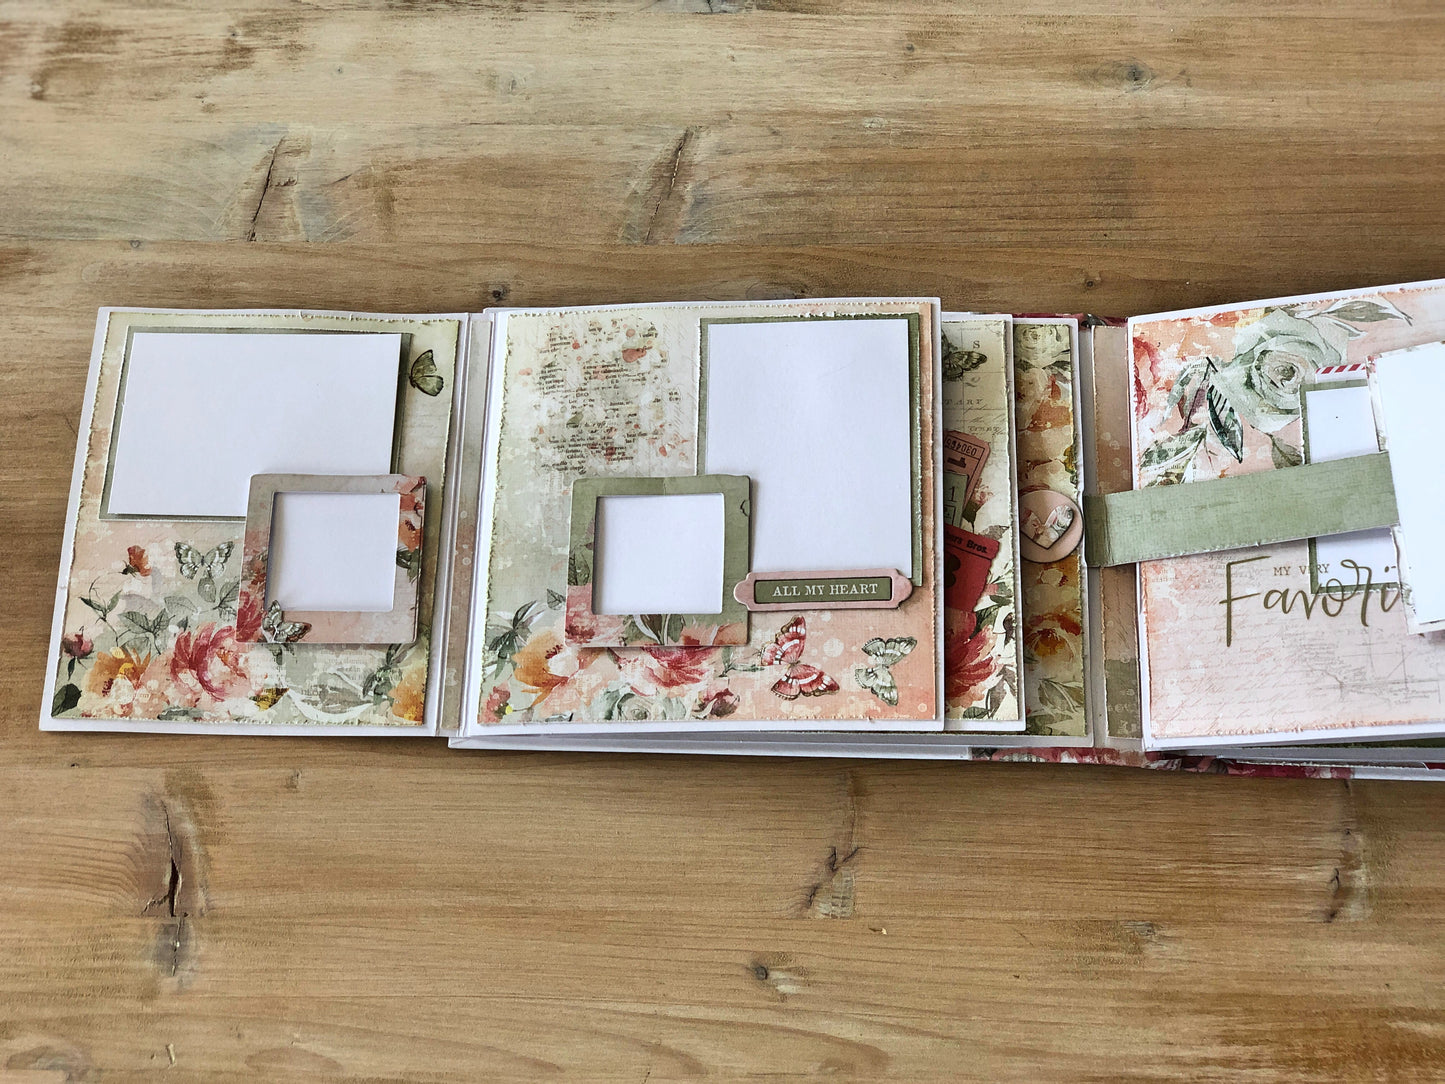 Hardcover Photo Album in a Vintage Floral Romantic style, Family Heirloom Gift for her, Decorated Junk Journal, Vacation Journal Scrapbook